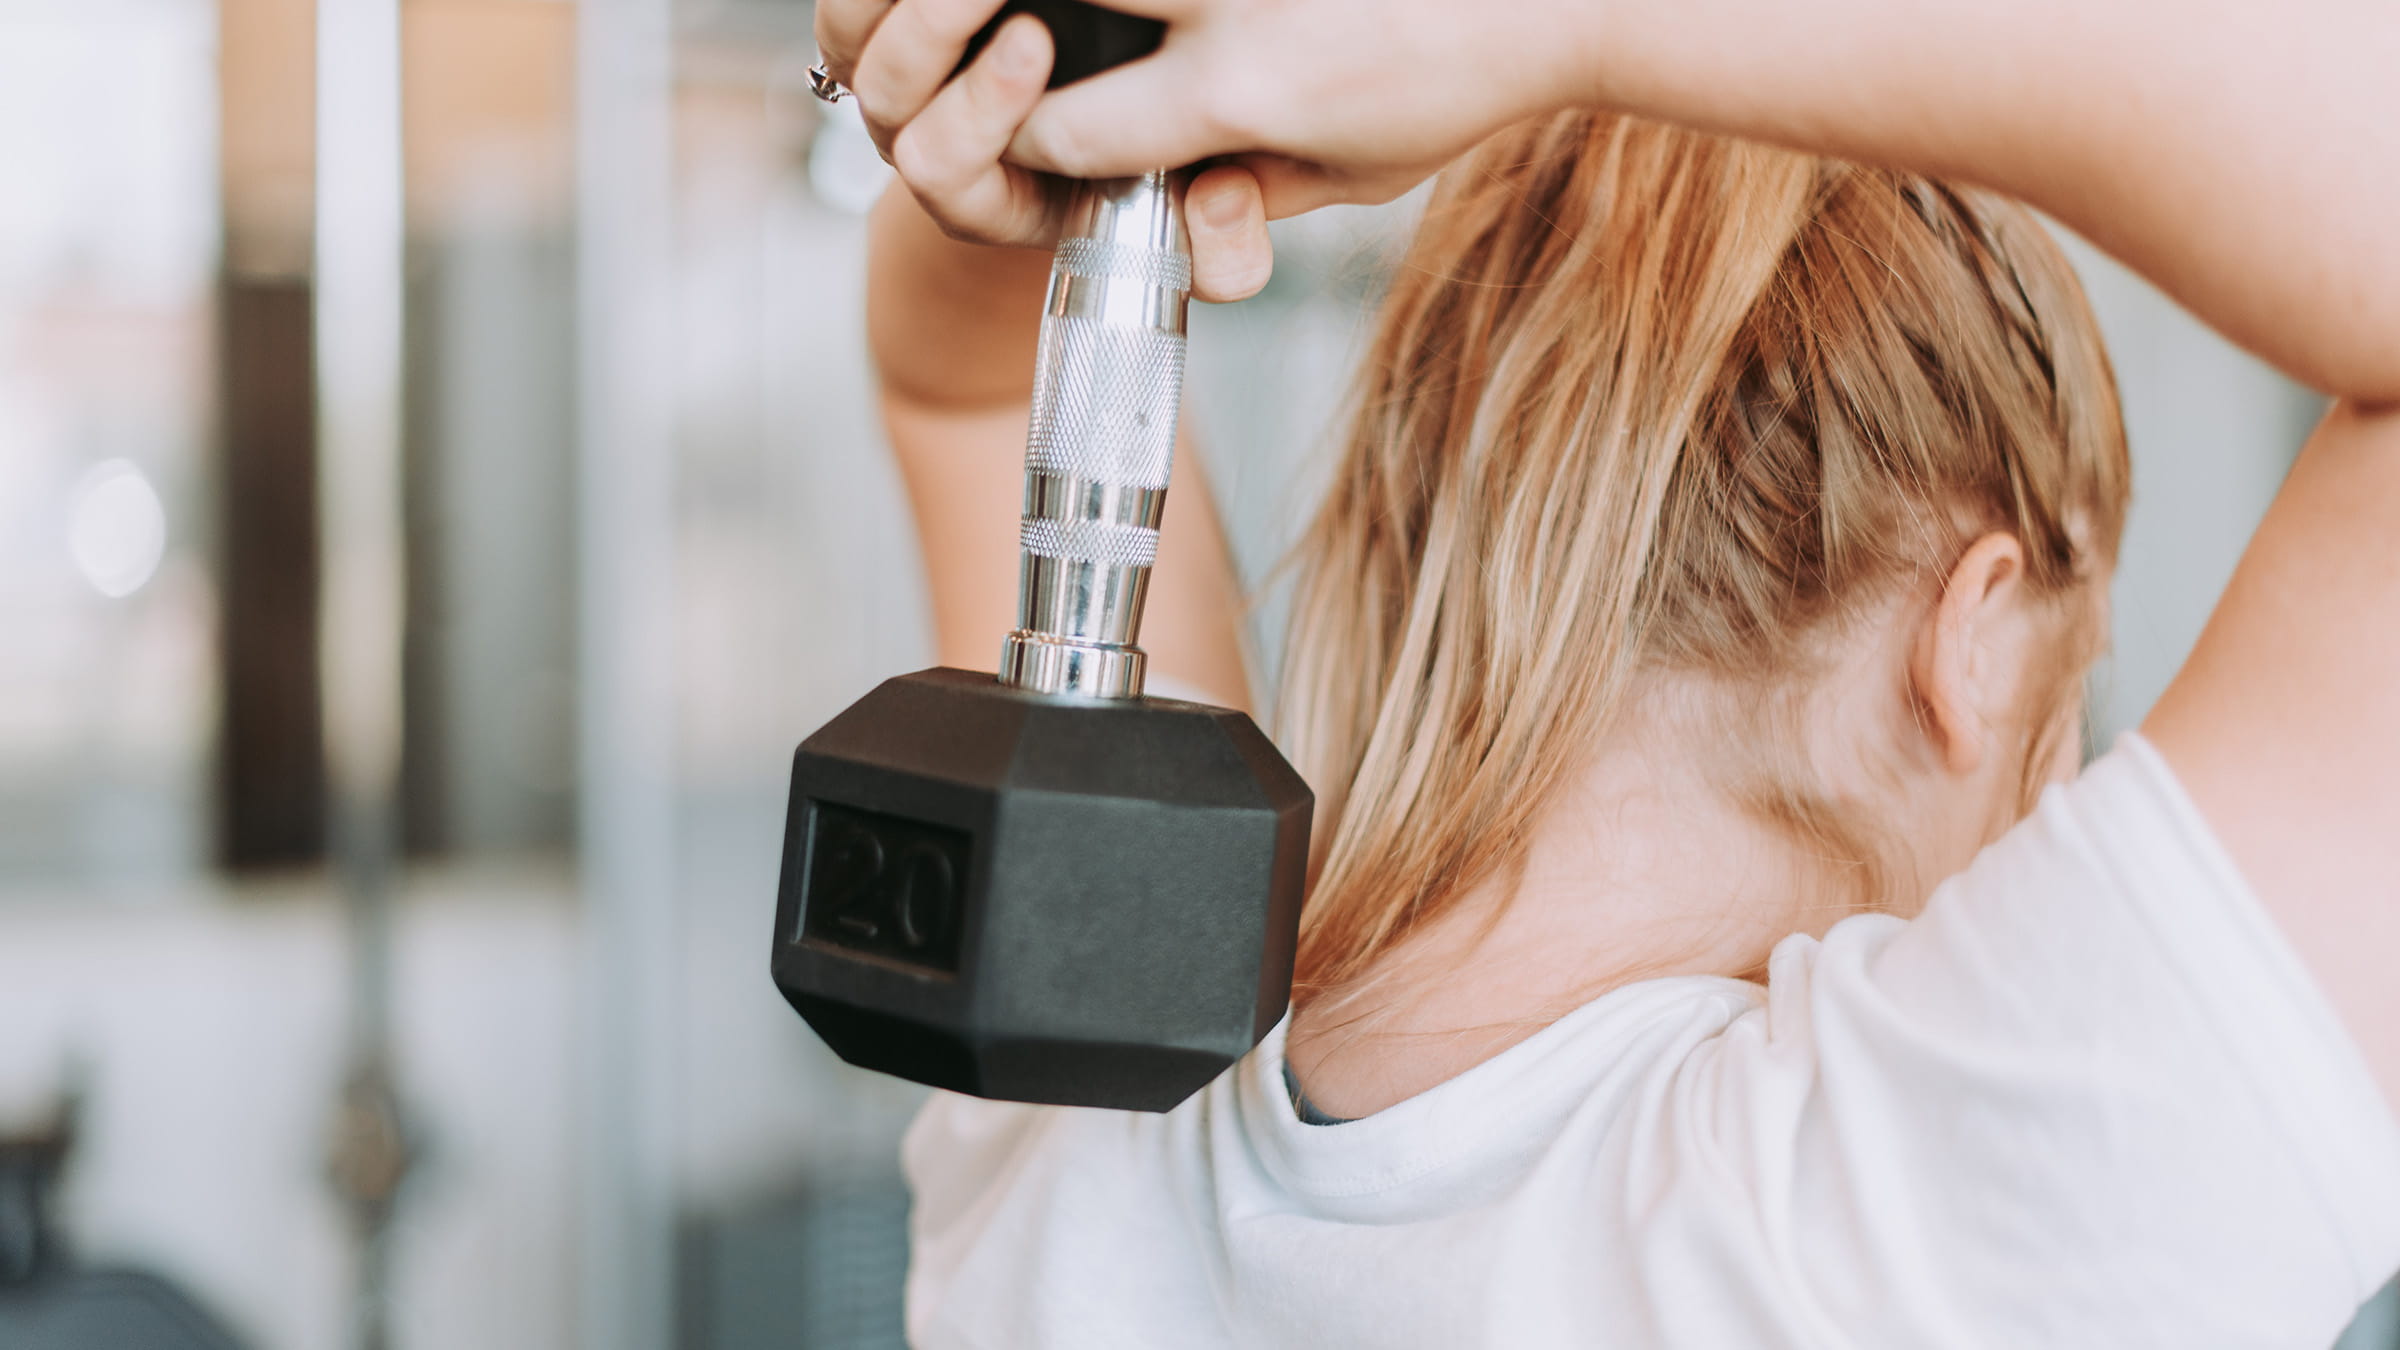 A woman lifting a dumbbell in a gym.